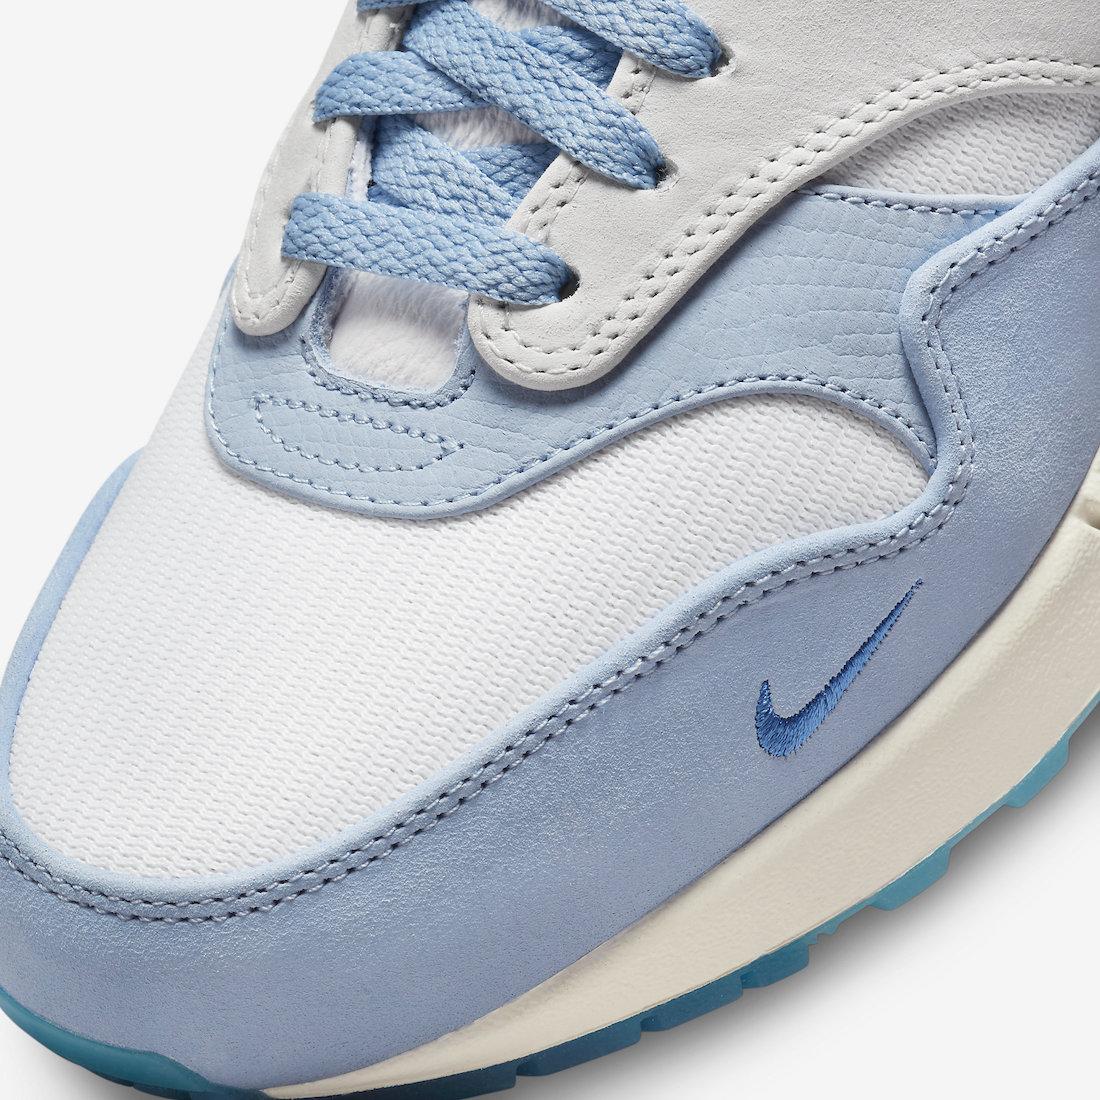 Nike-Air-Max-1-Blueprint-DR0448-100-Release-Date-Price-6